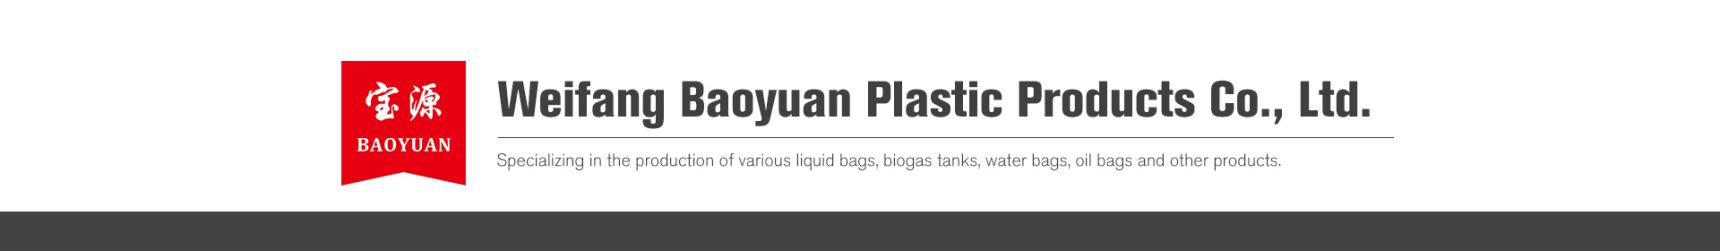 Wholesale PVC digester septic tank green environmental protection can be recycled for digester factory